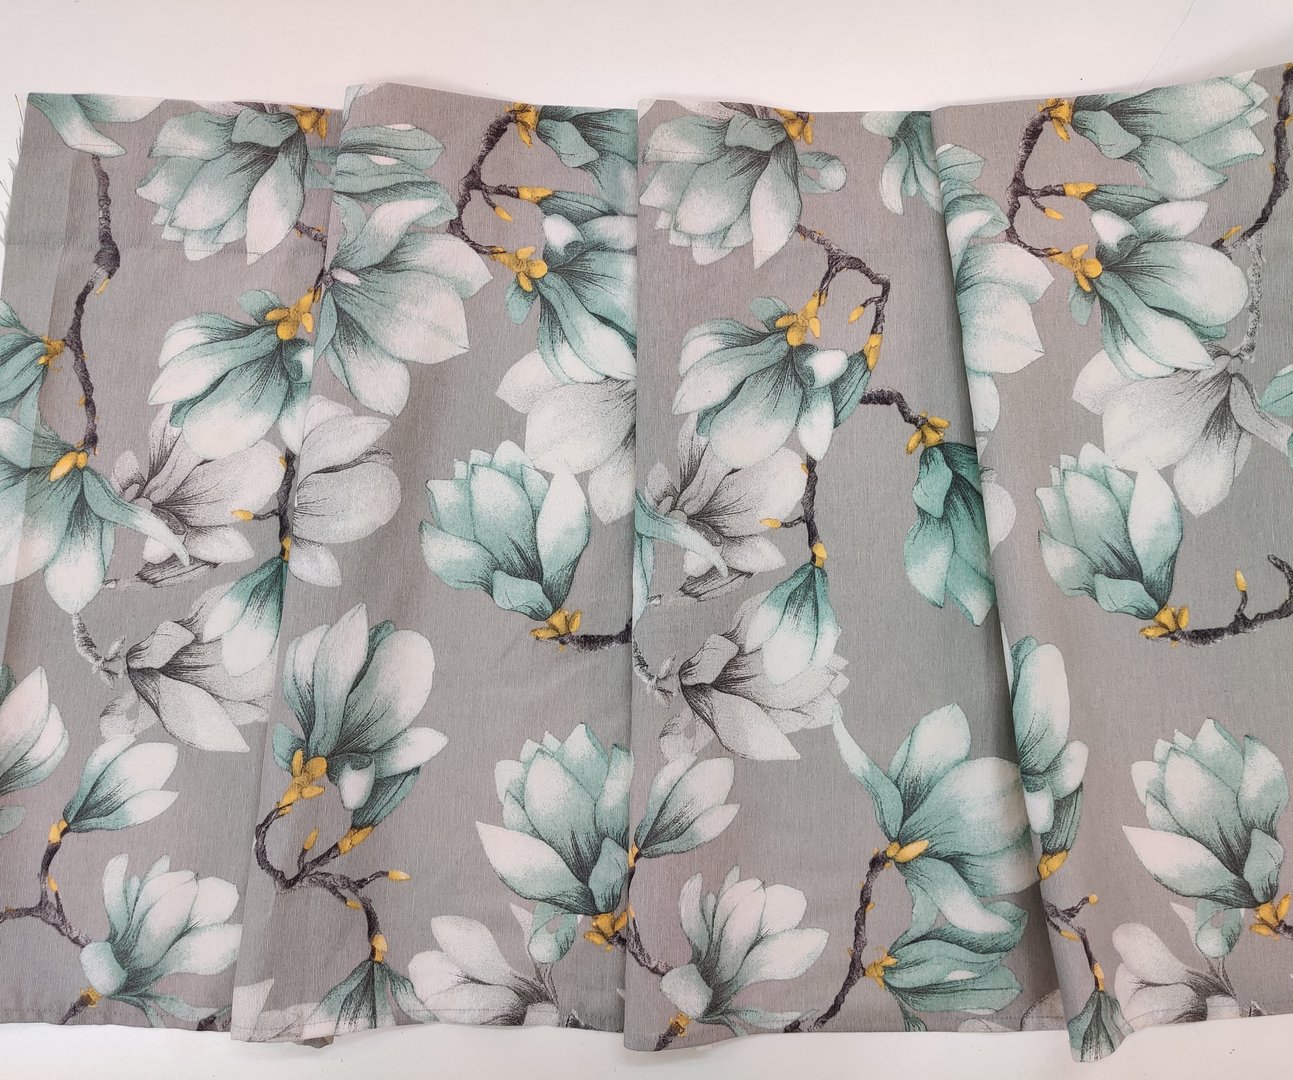 Florales green low curtain fabric